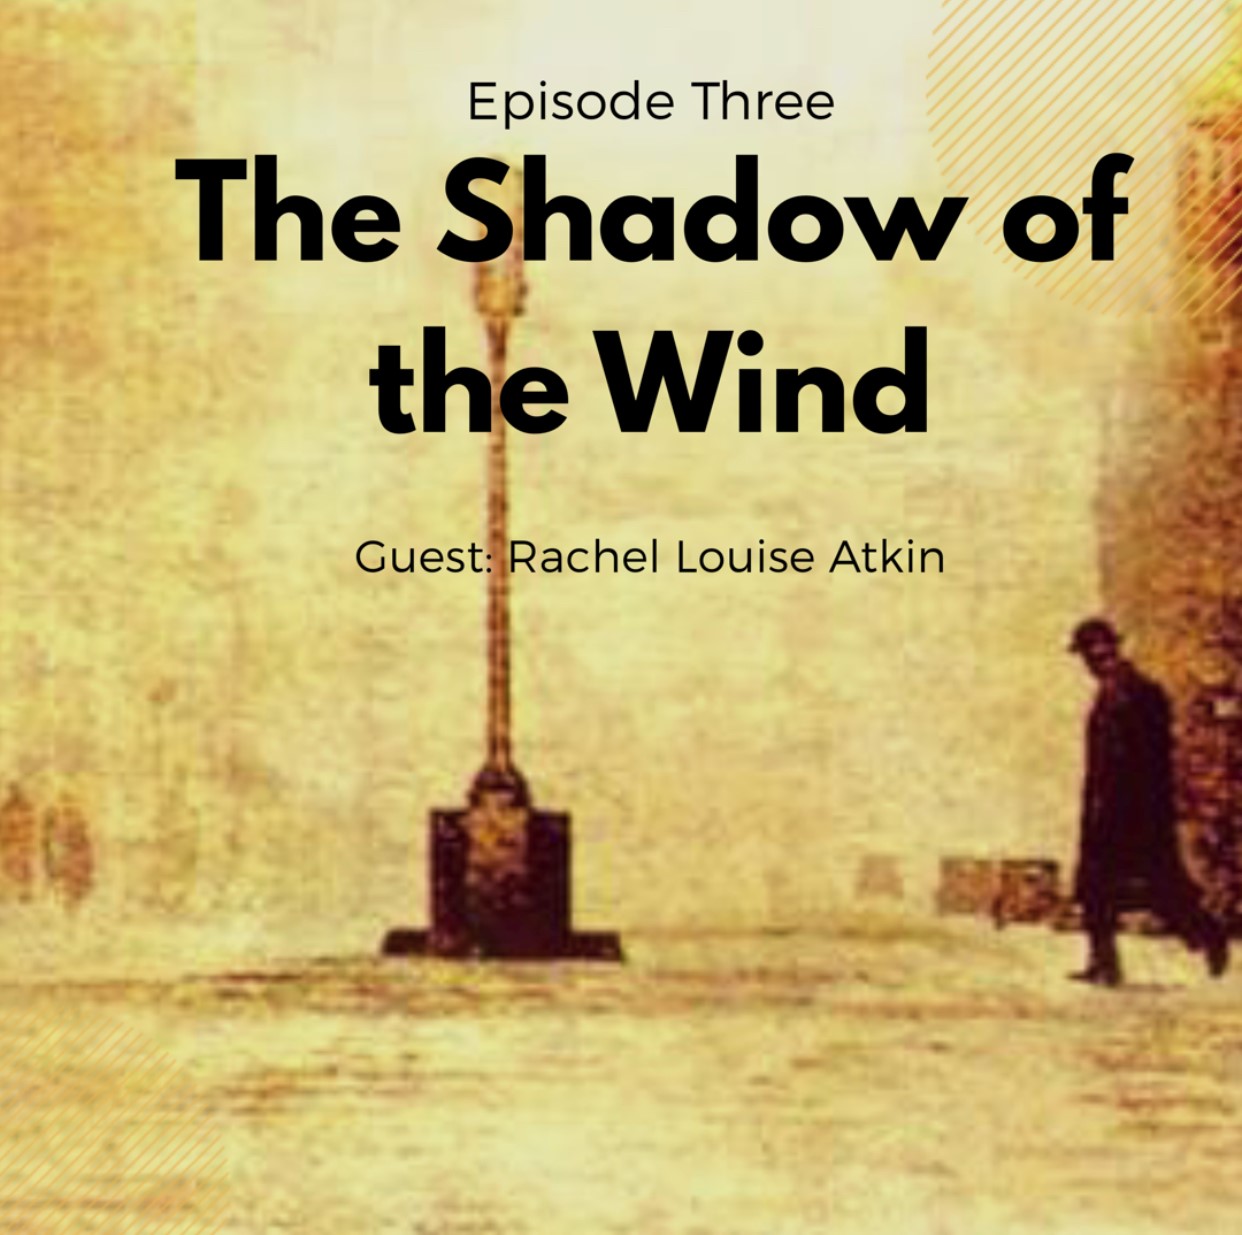 Episode 3 - The Shadow of the Wind